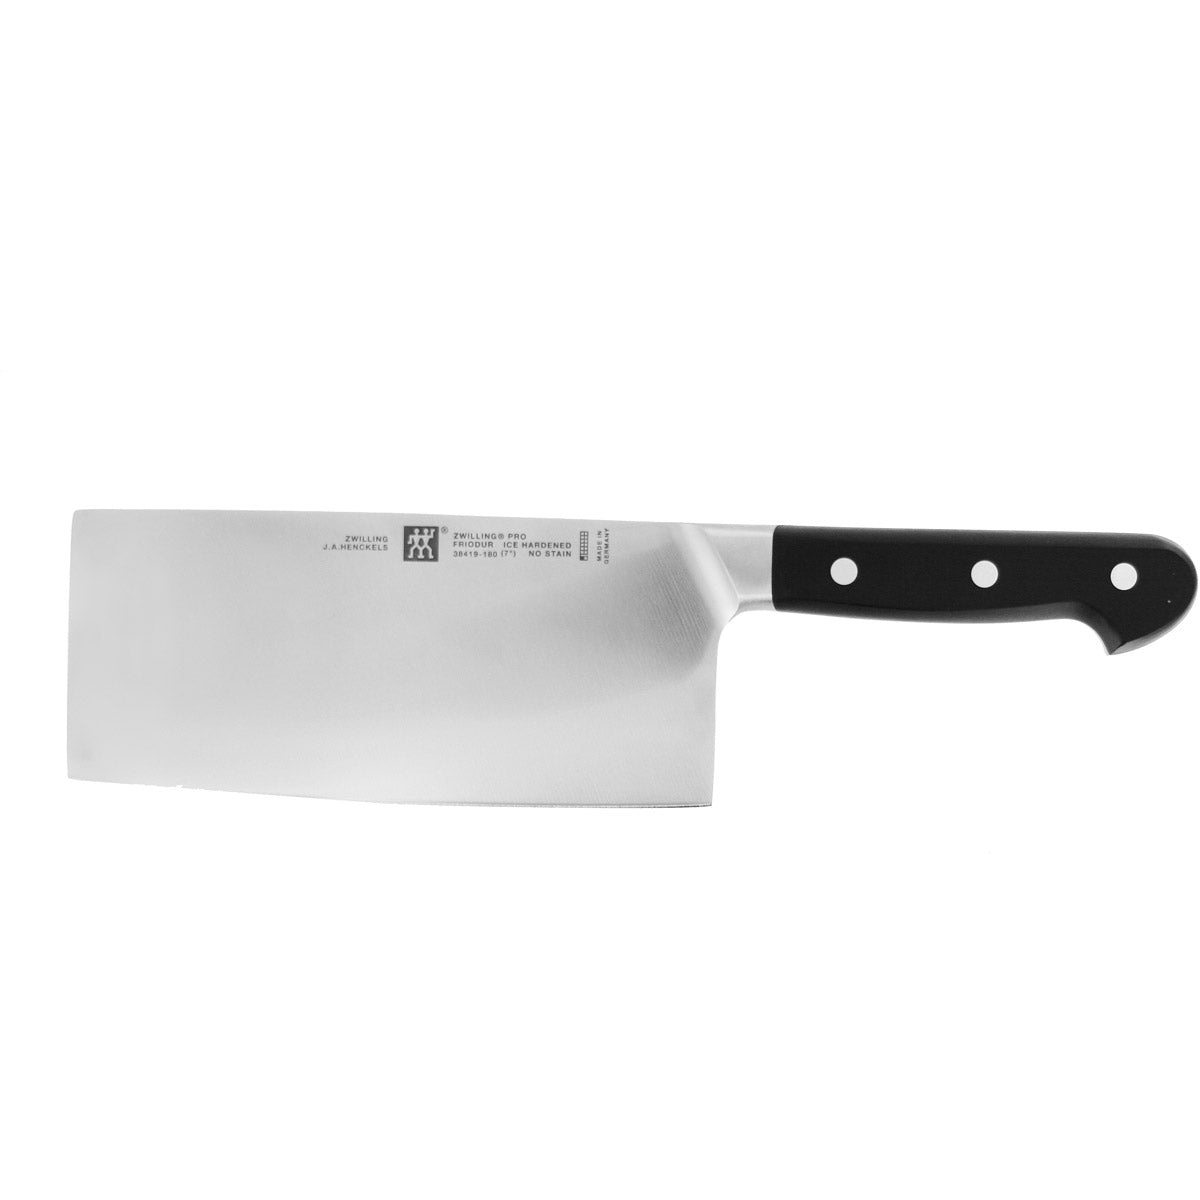 ZWILLING Tradition 7 Vegetable Cleaver